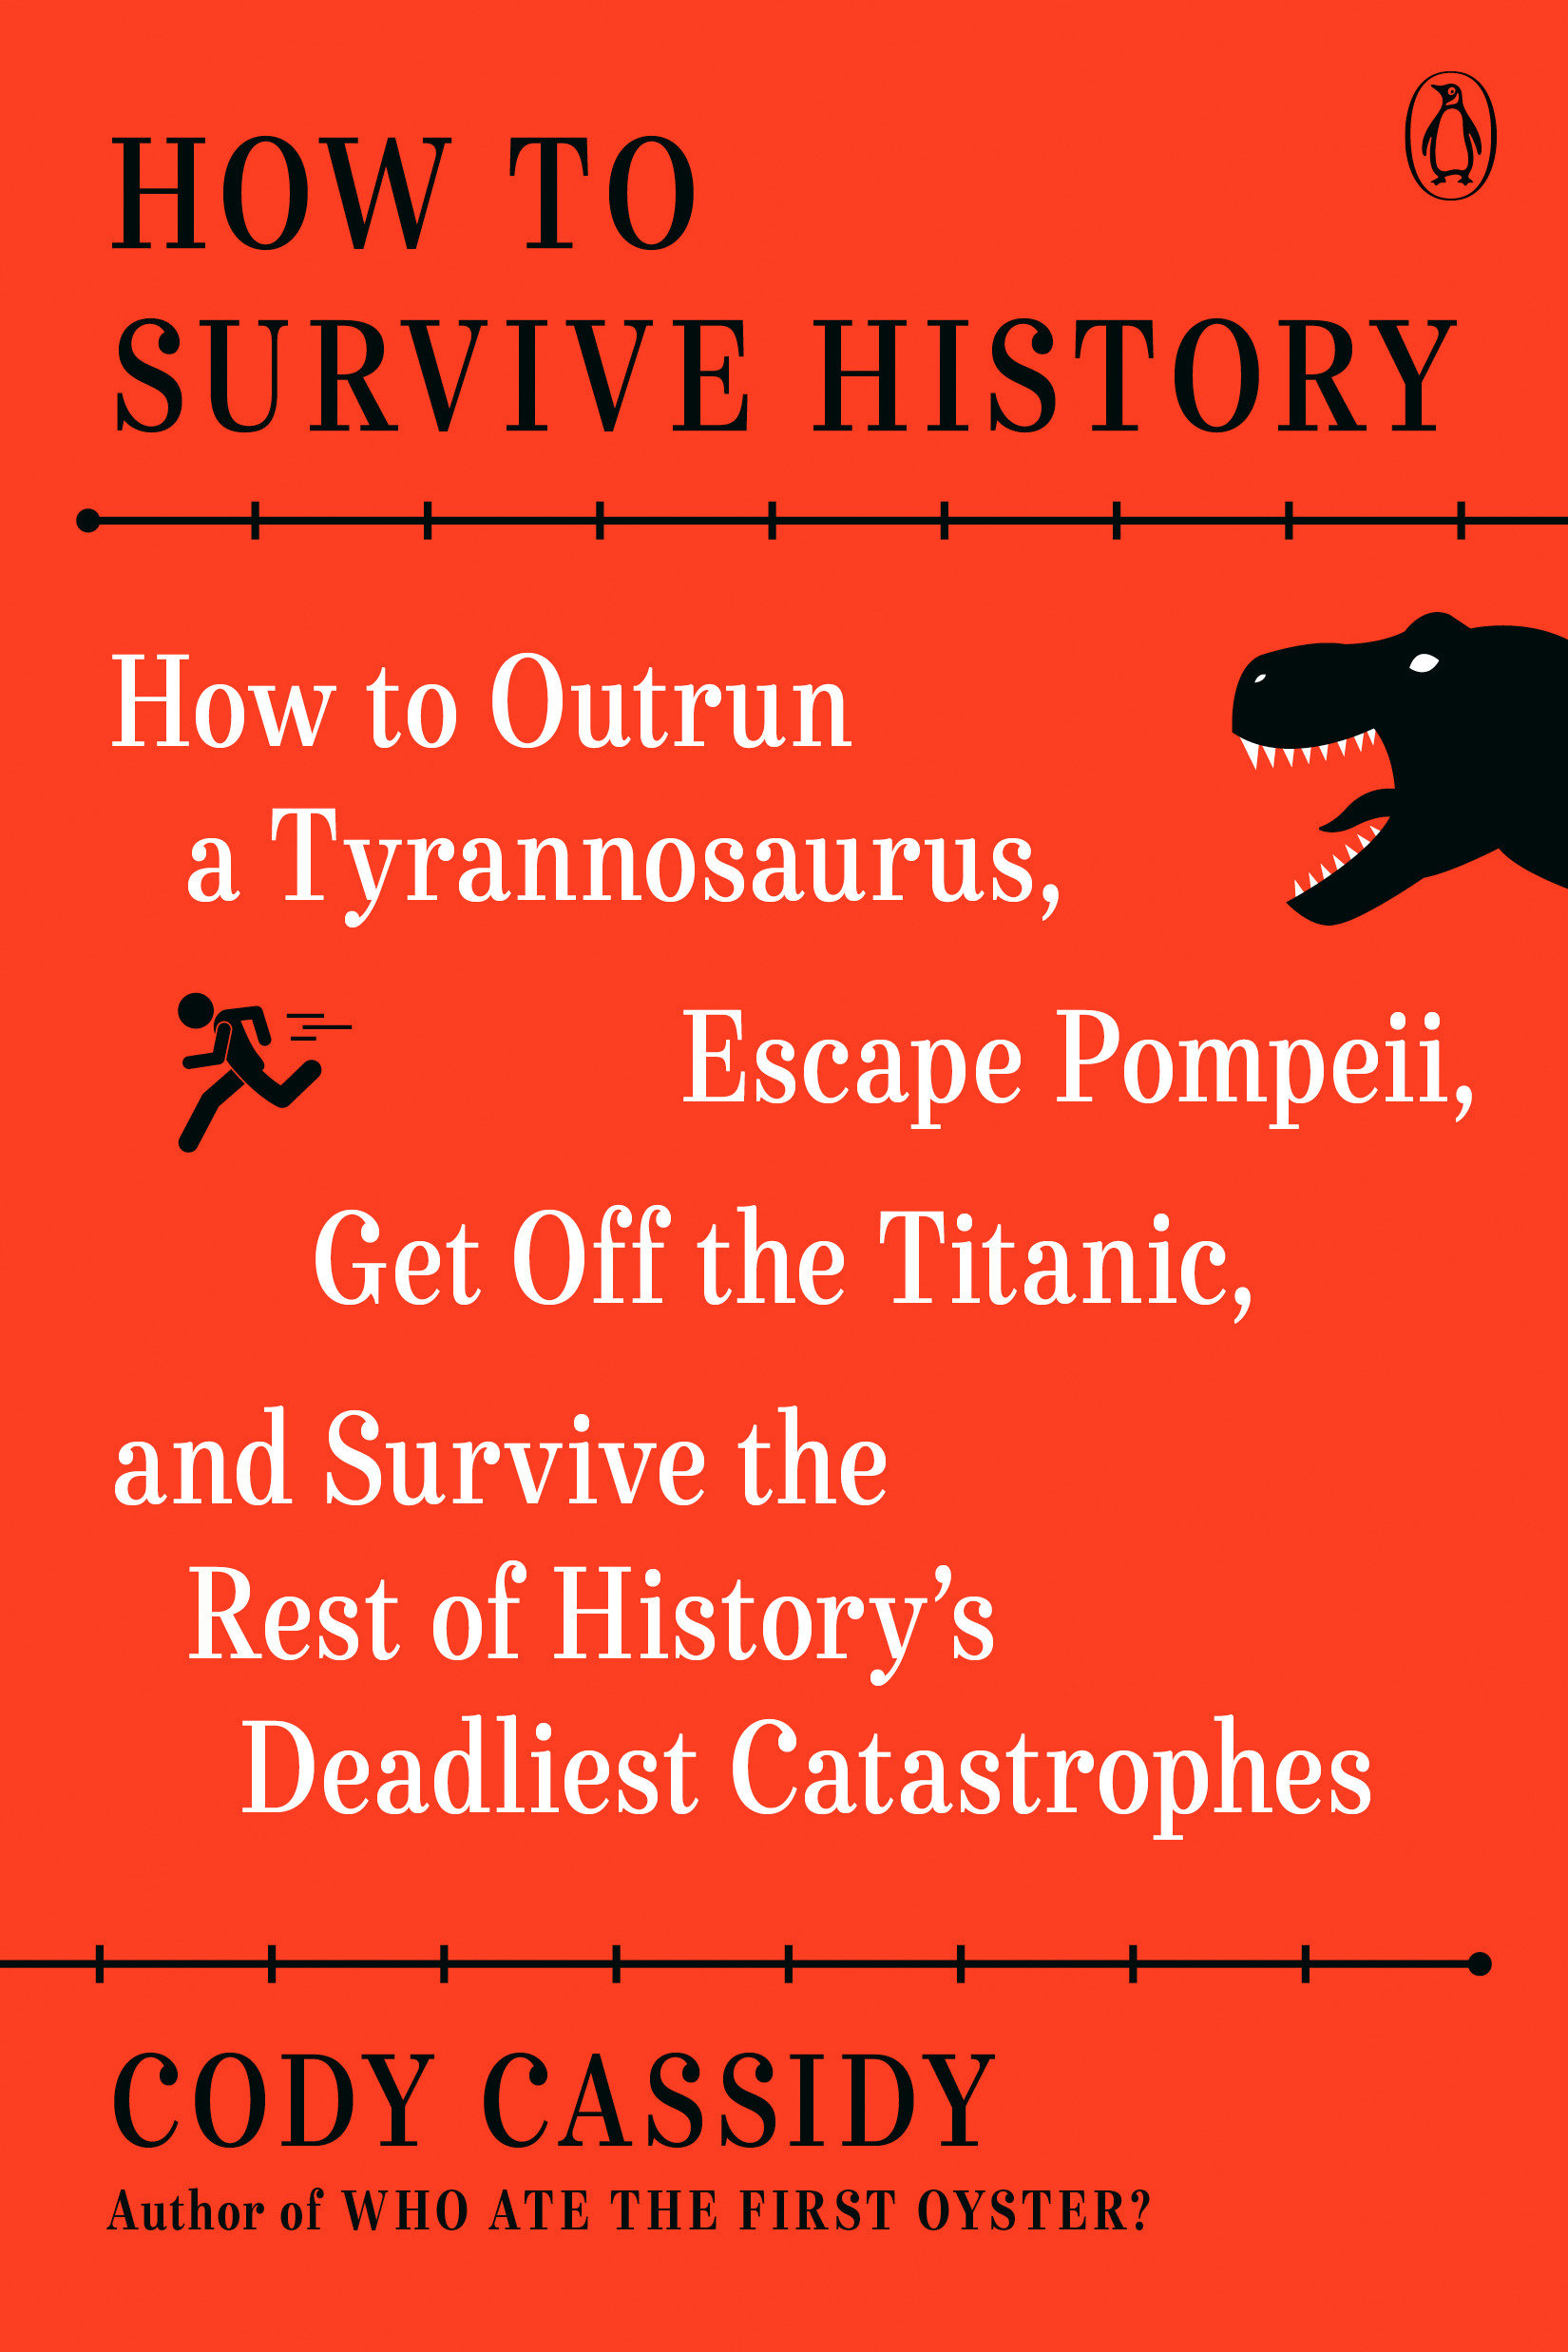 How To Survive History (Paperback)